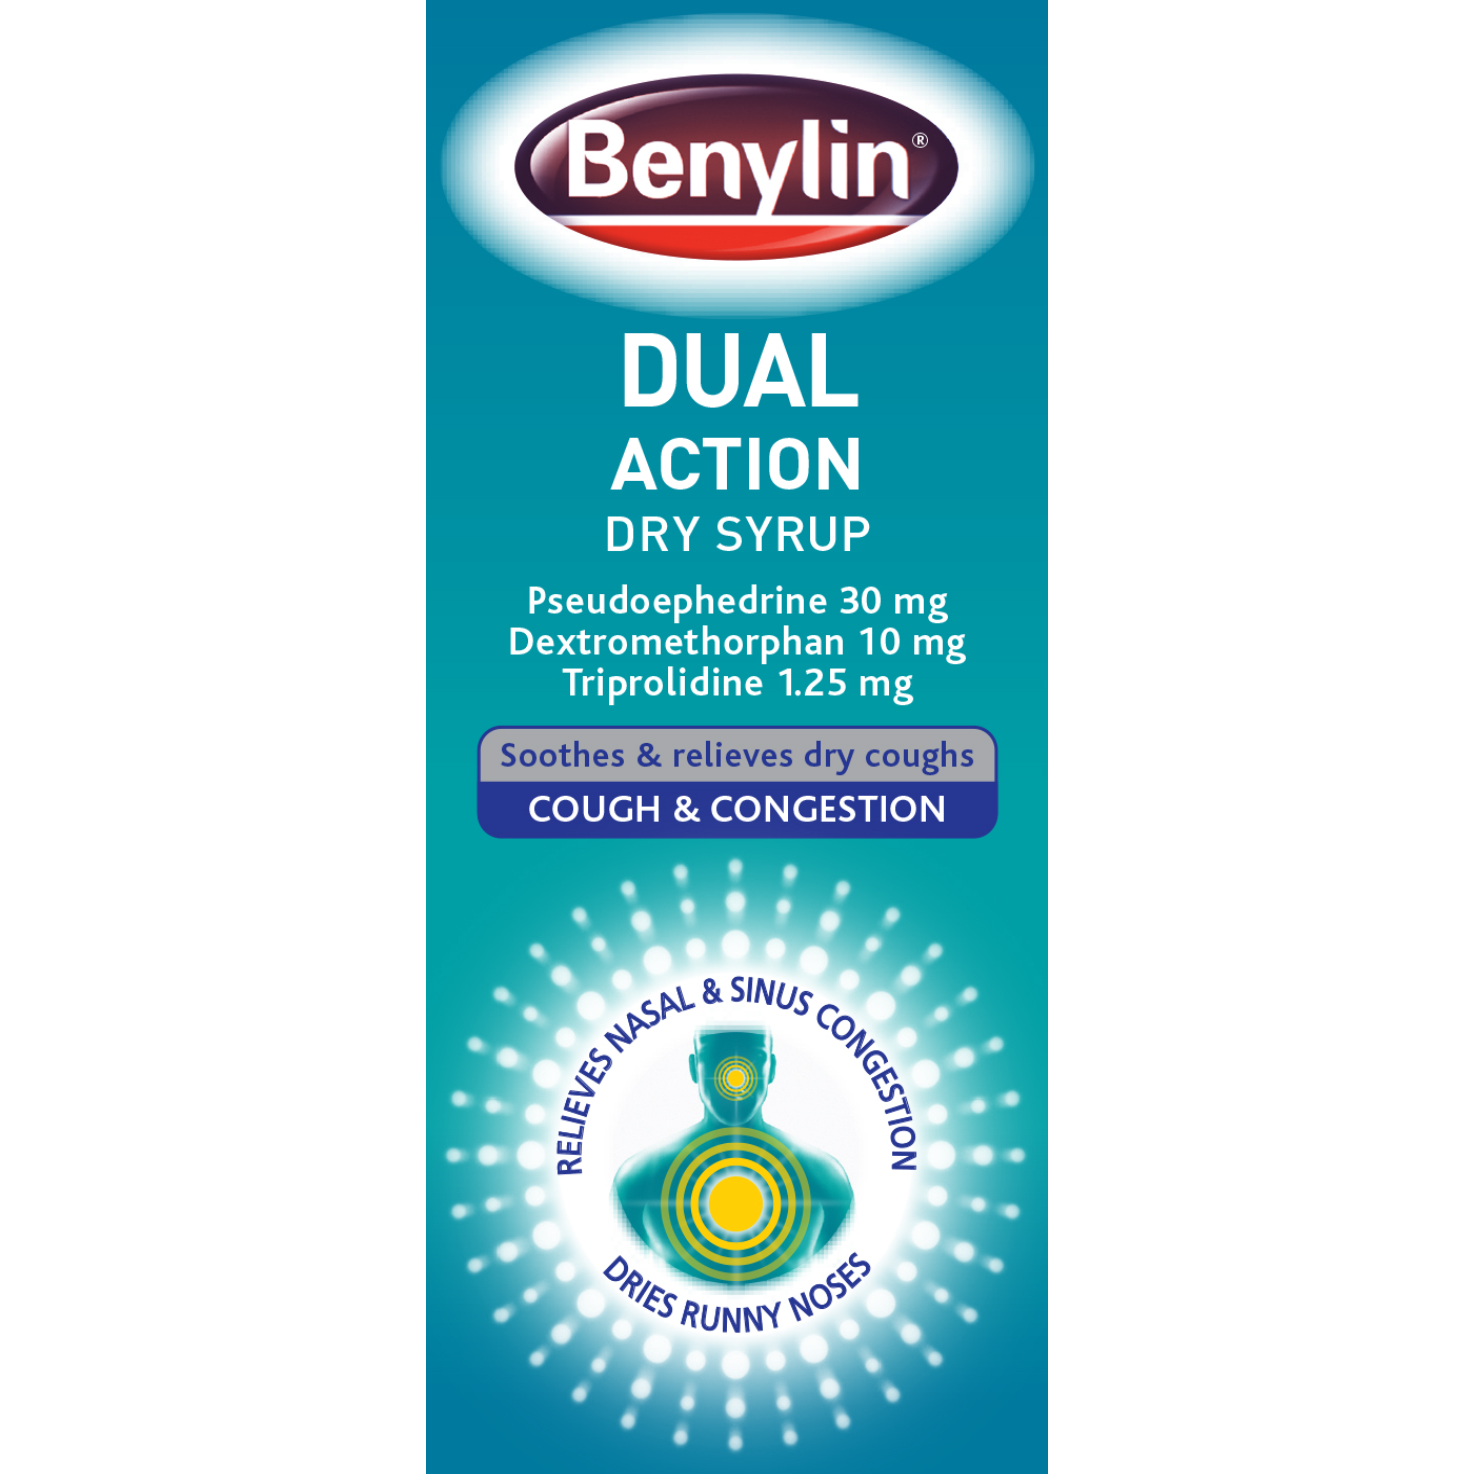 Benylin Dual Action Dry Syrup 100ml